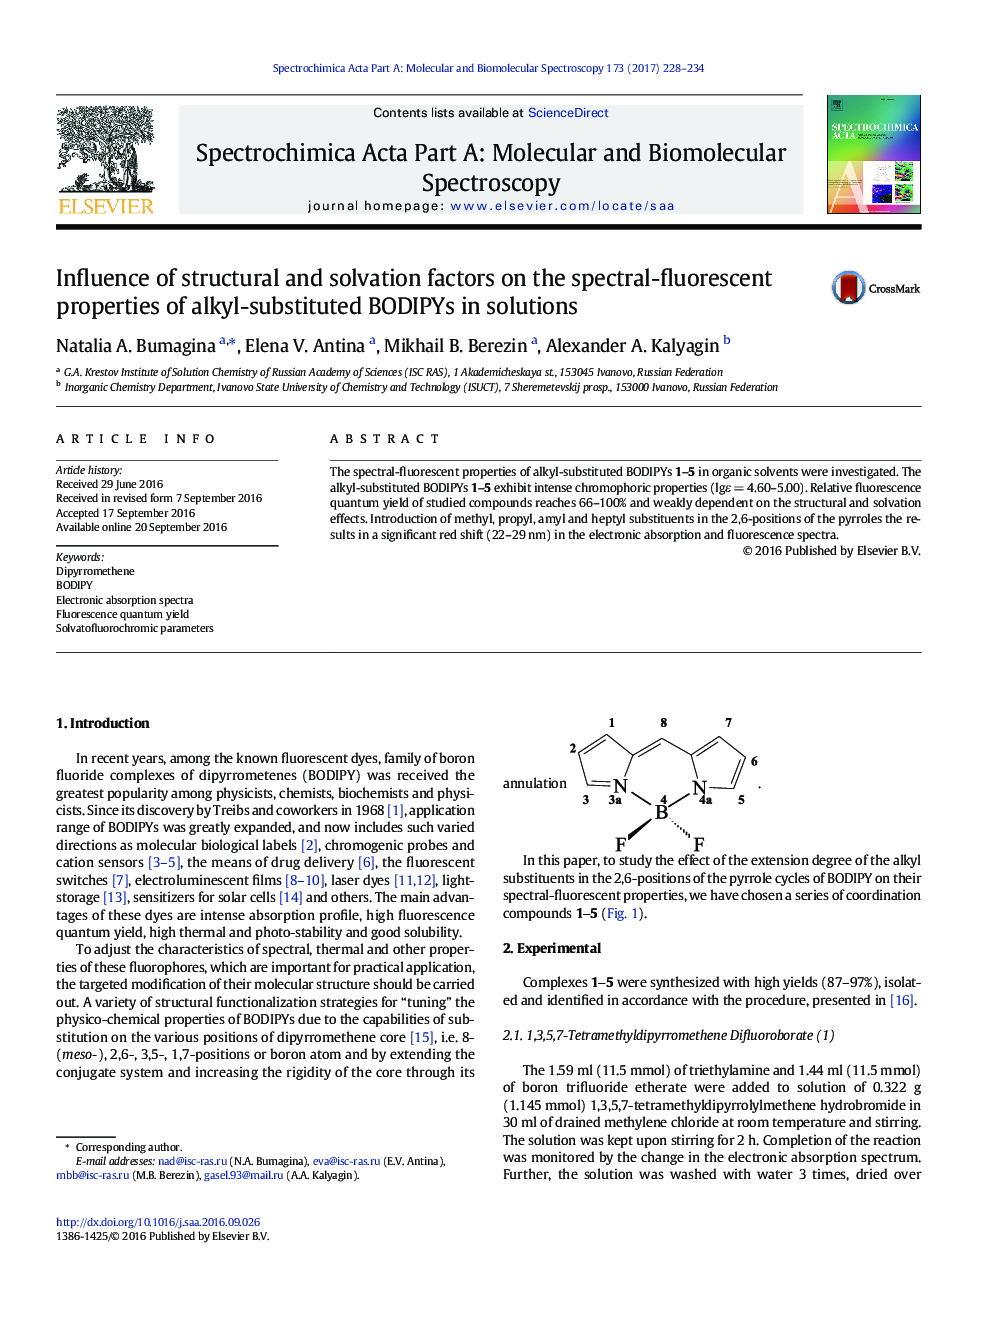 Influence of structural and solvation factors on the spectral-fluorescent properties of alkyl-substituted BODIPYs in solutions